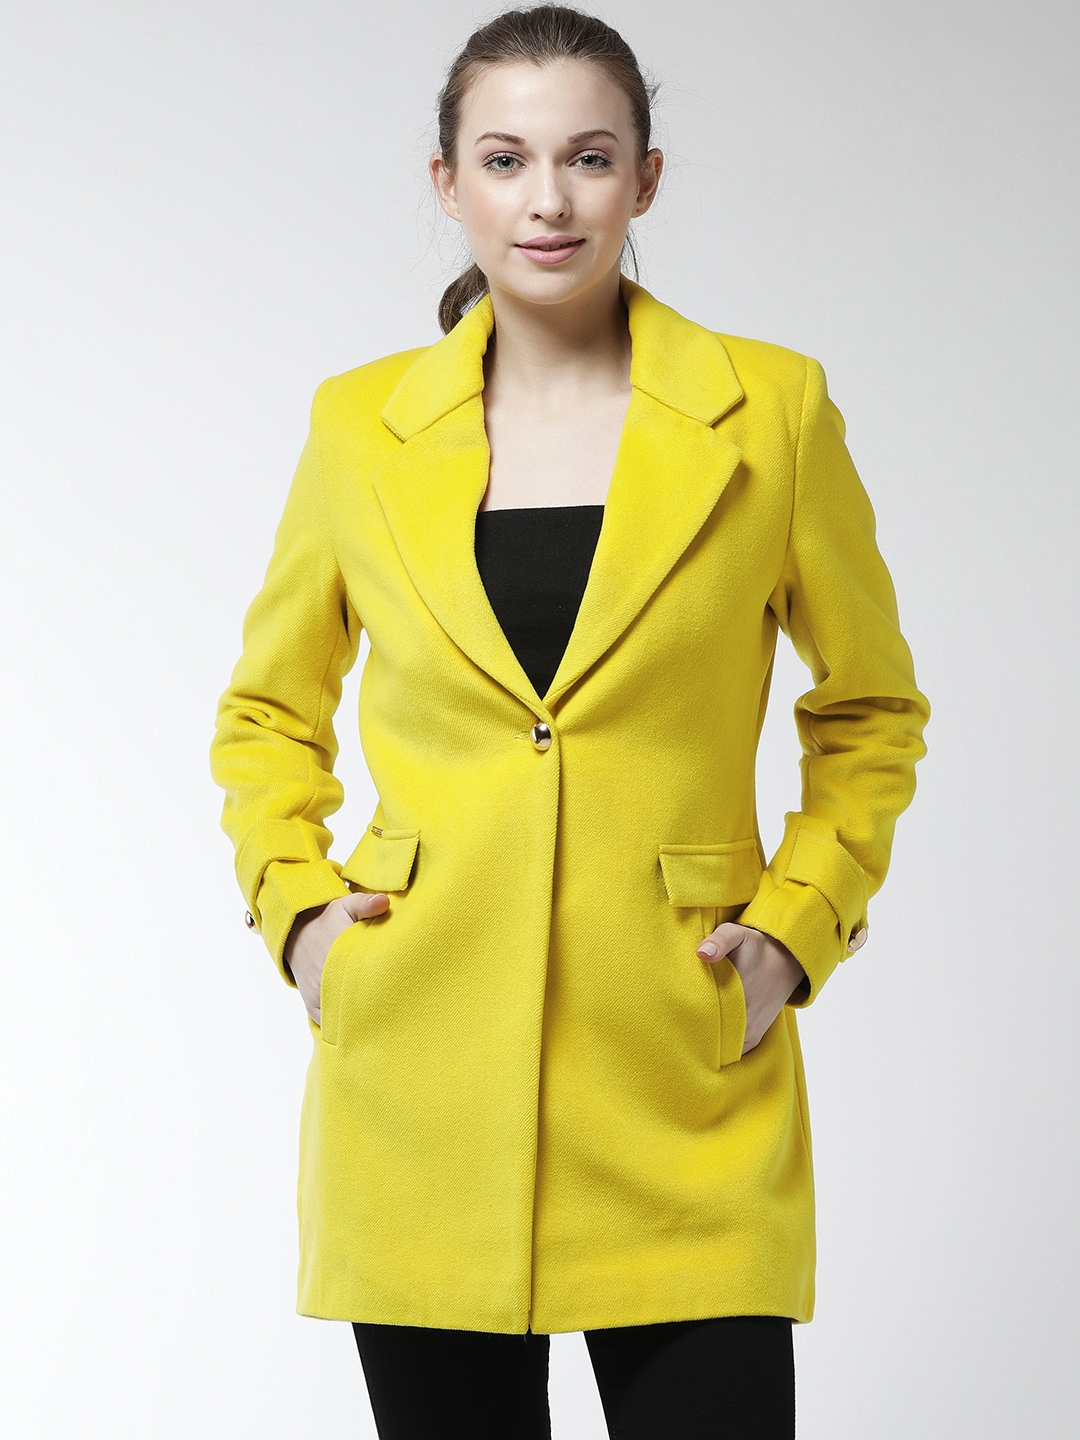 Kcocoo Womens Artificial Wool Coat Trench Jacket Ladies Warm Long Overcoat  Outwear Yellow M 